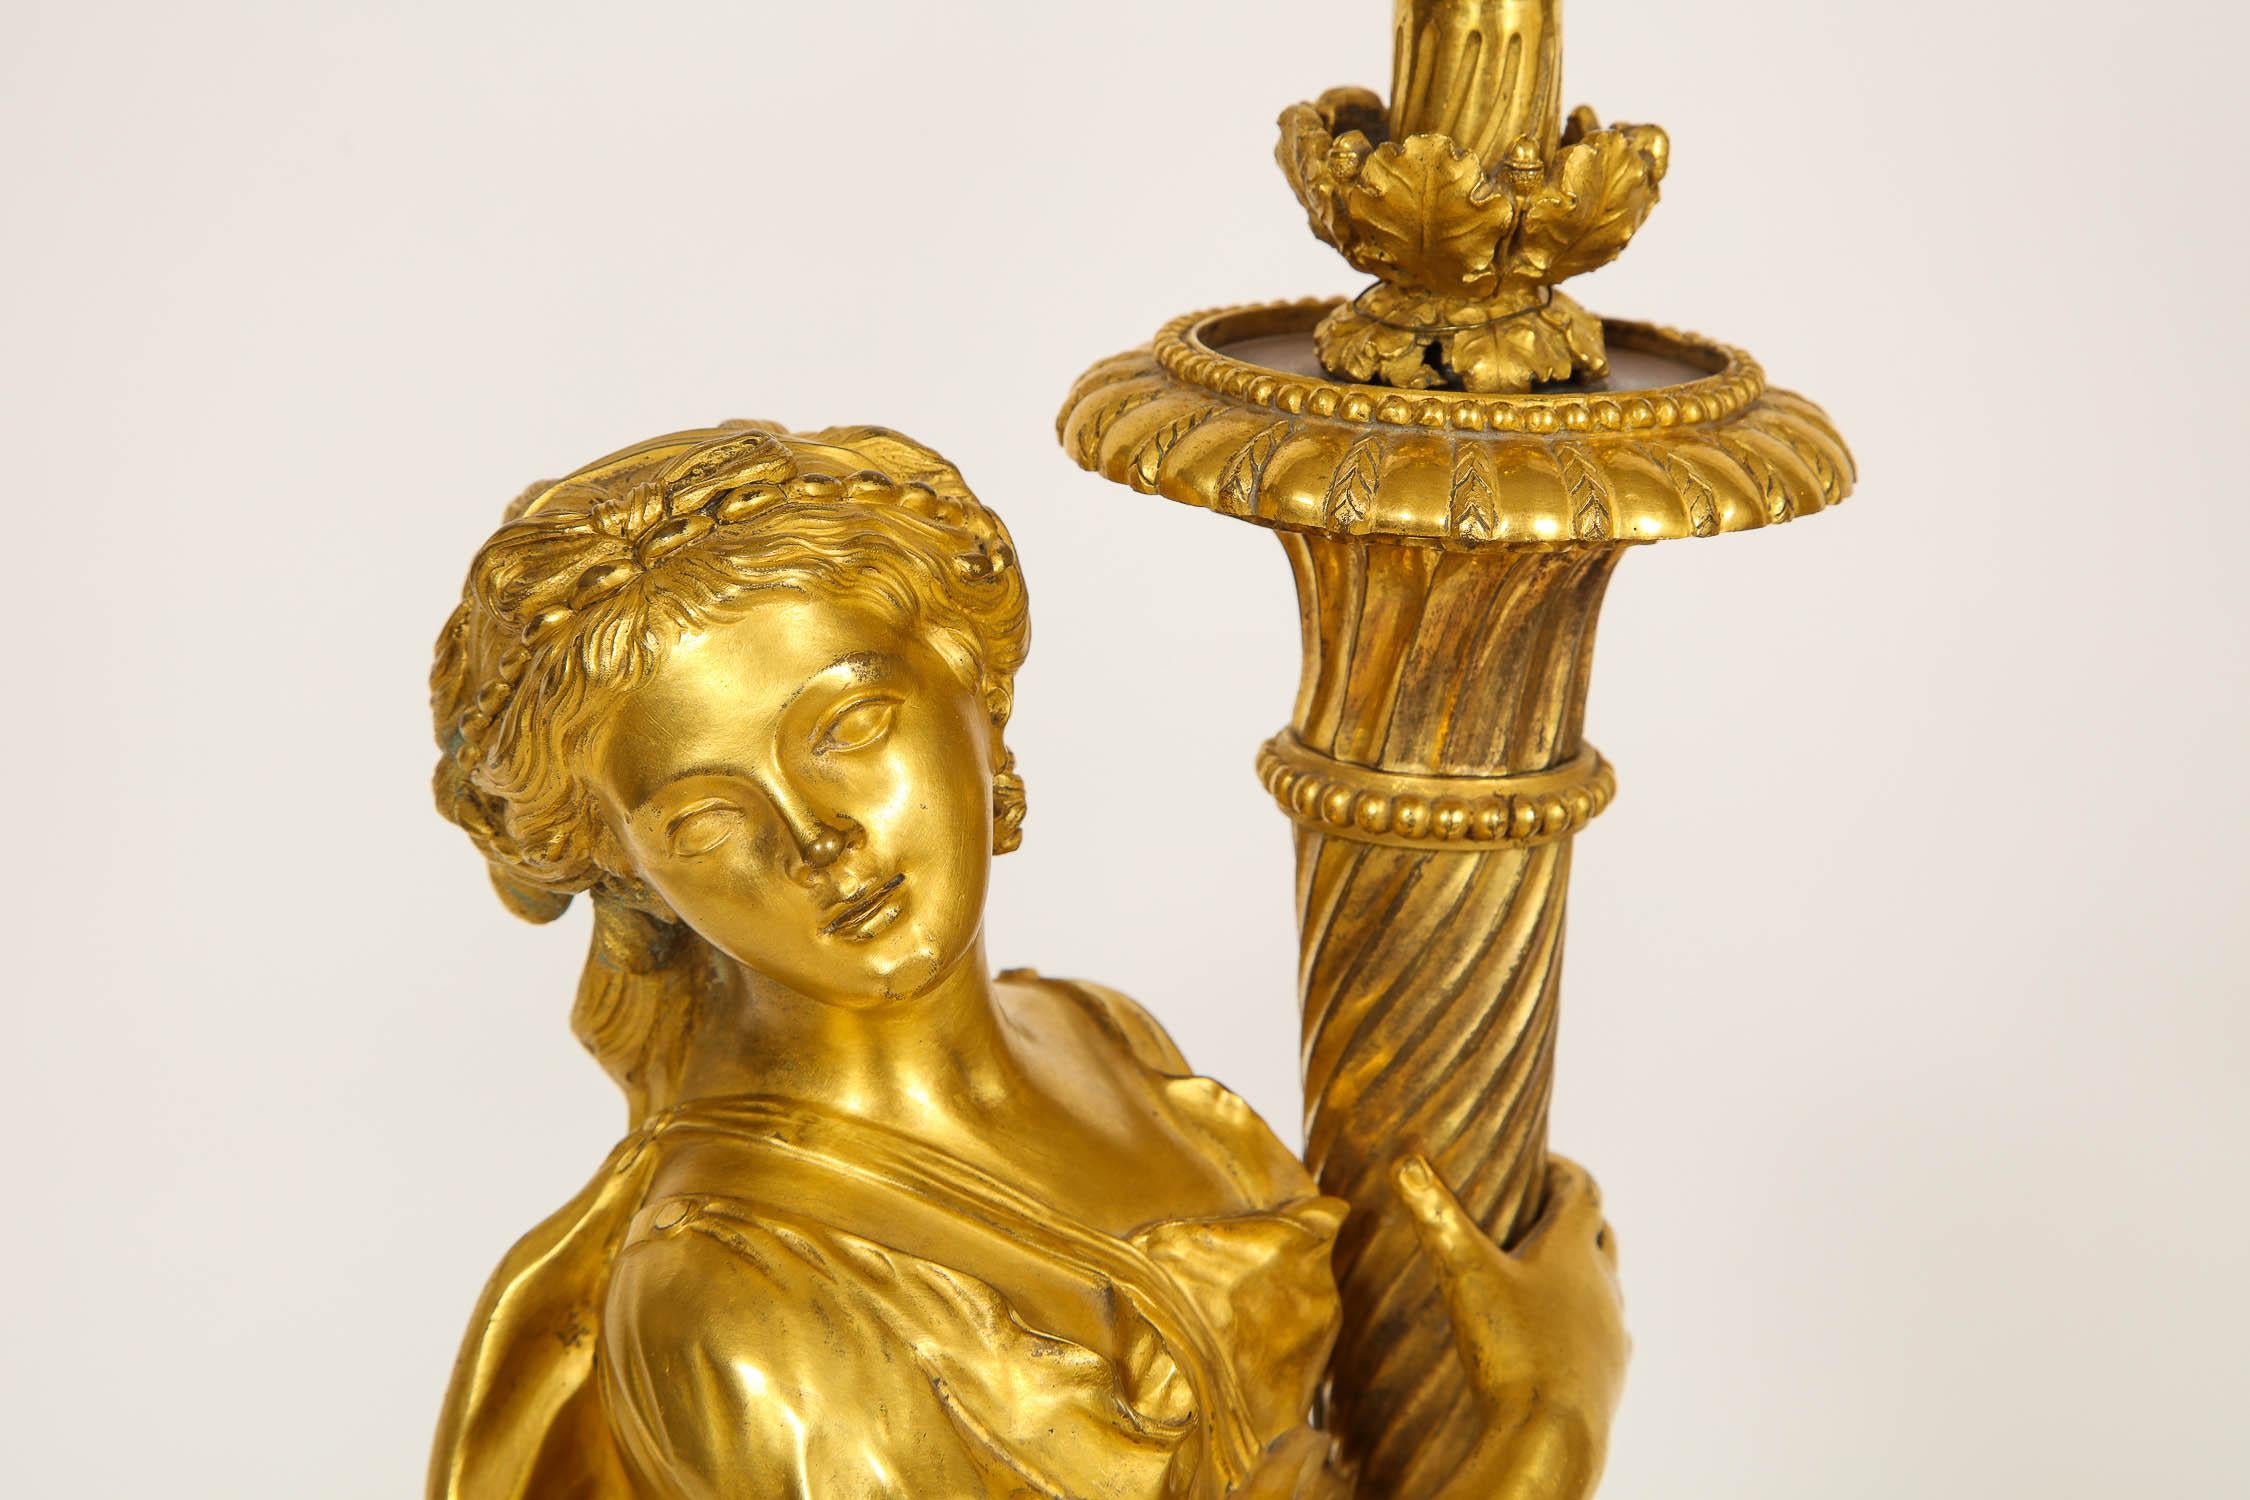 Pair of 18th Century Louis XVI Period Gilt-Bronze Figures of Maidens as Lamps For Sale 1